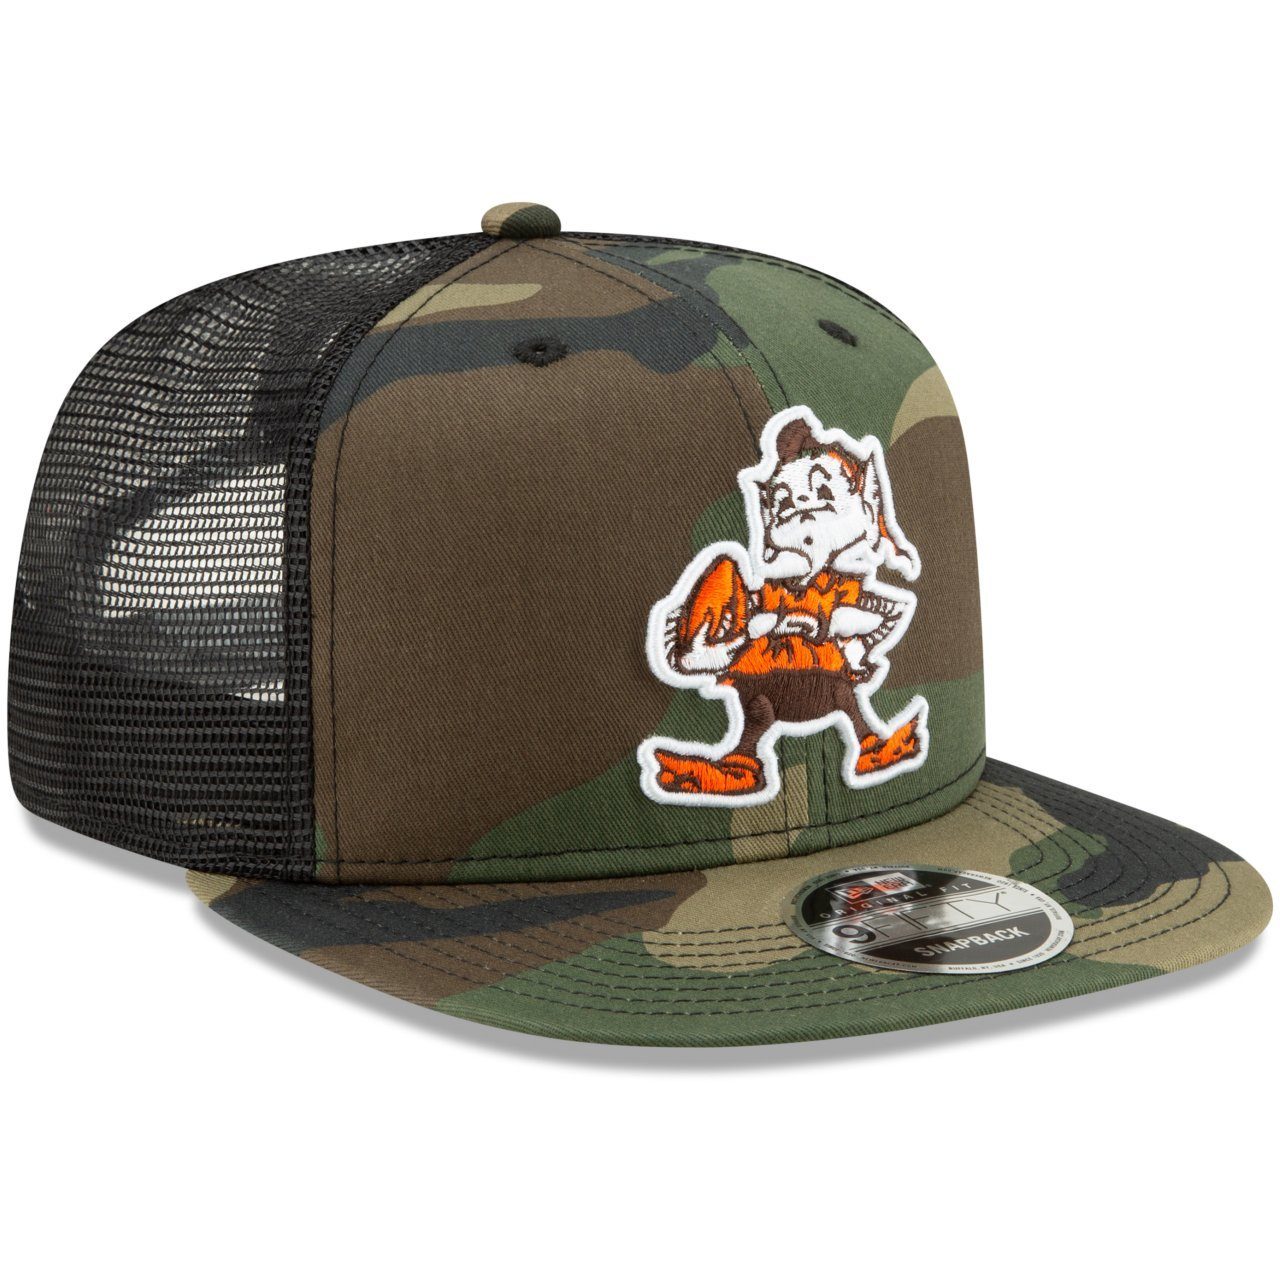 Era Throwback 9Fifty Browns Snapback Cap New Cleveland